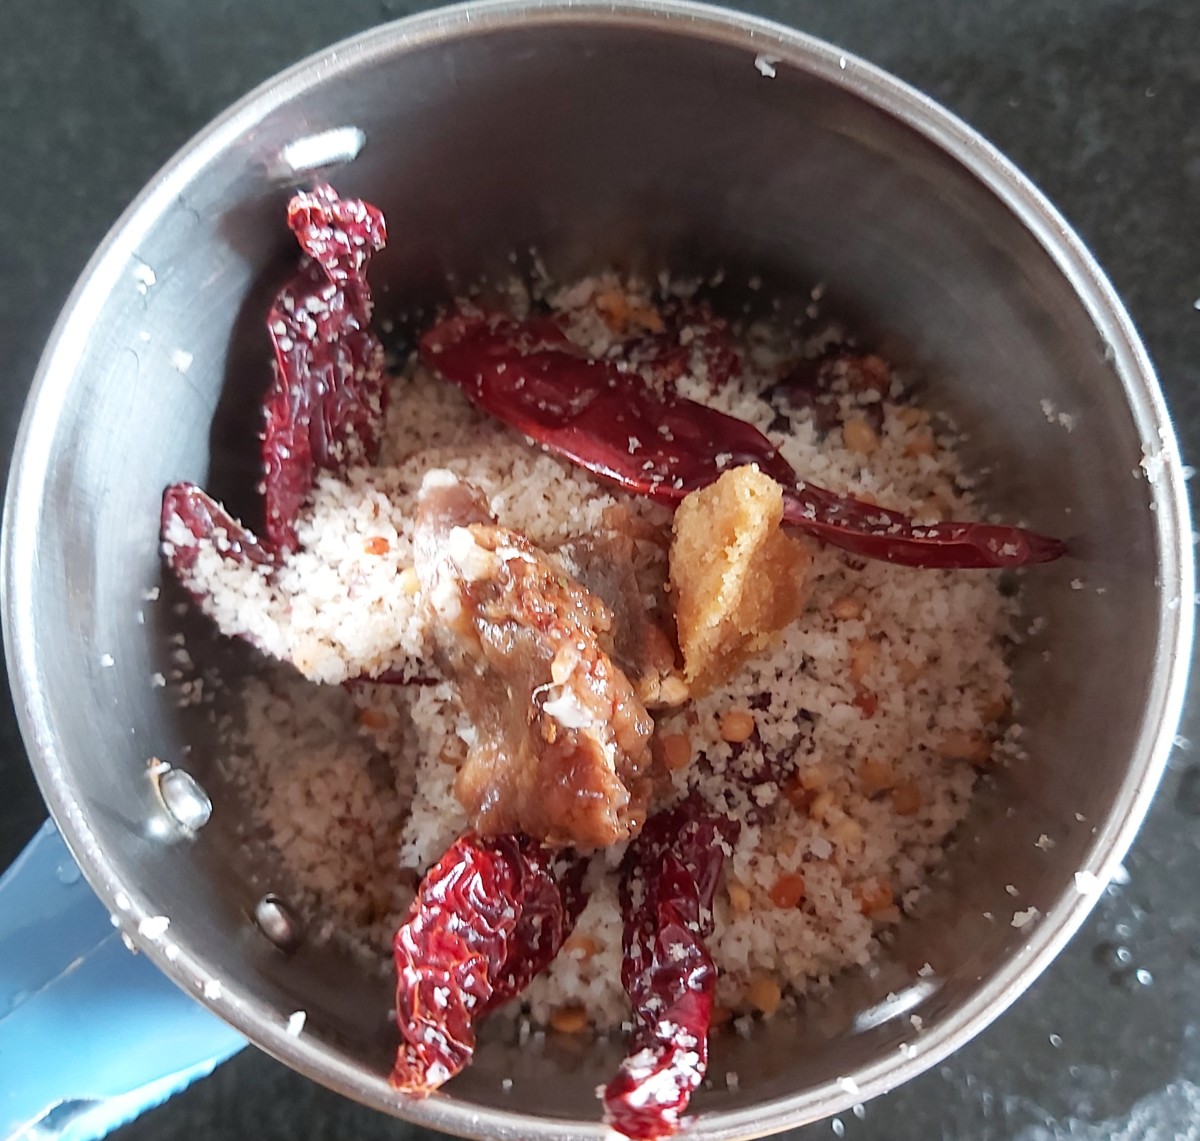 After cooling down, add this mixture to the mixer jar. Add soaked tamarind (no need to add water in which tamarind is soaked) and 1 teaspoon of jaggery.